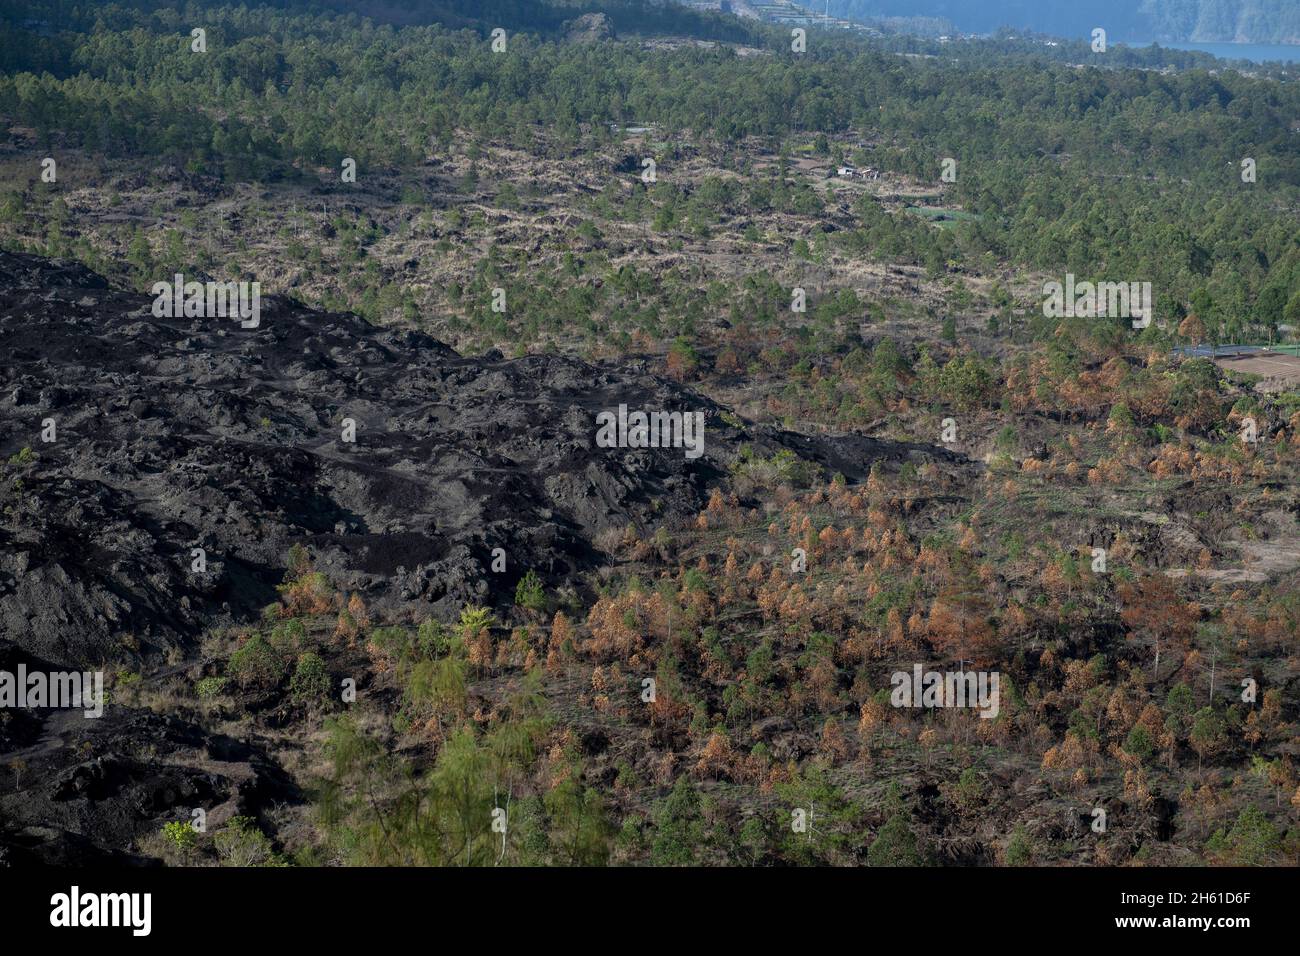 View of extent of lava flow from 1974, Mount Batur, Bangli Regency, Bali, Indonesia, Asia Stock Photo